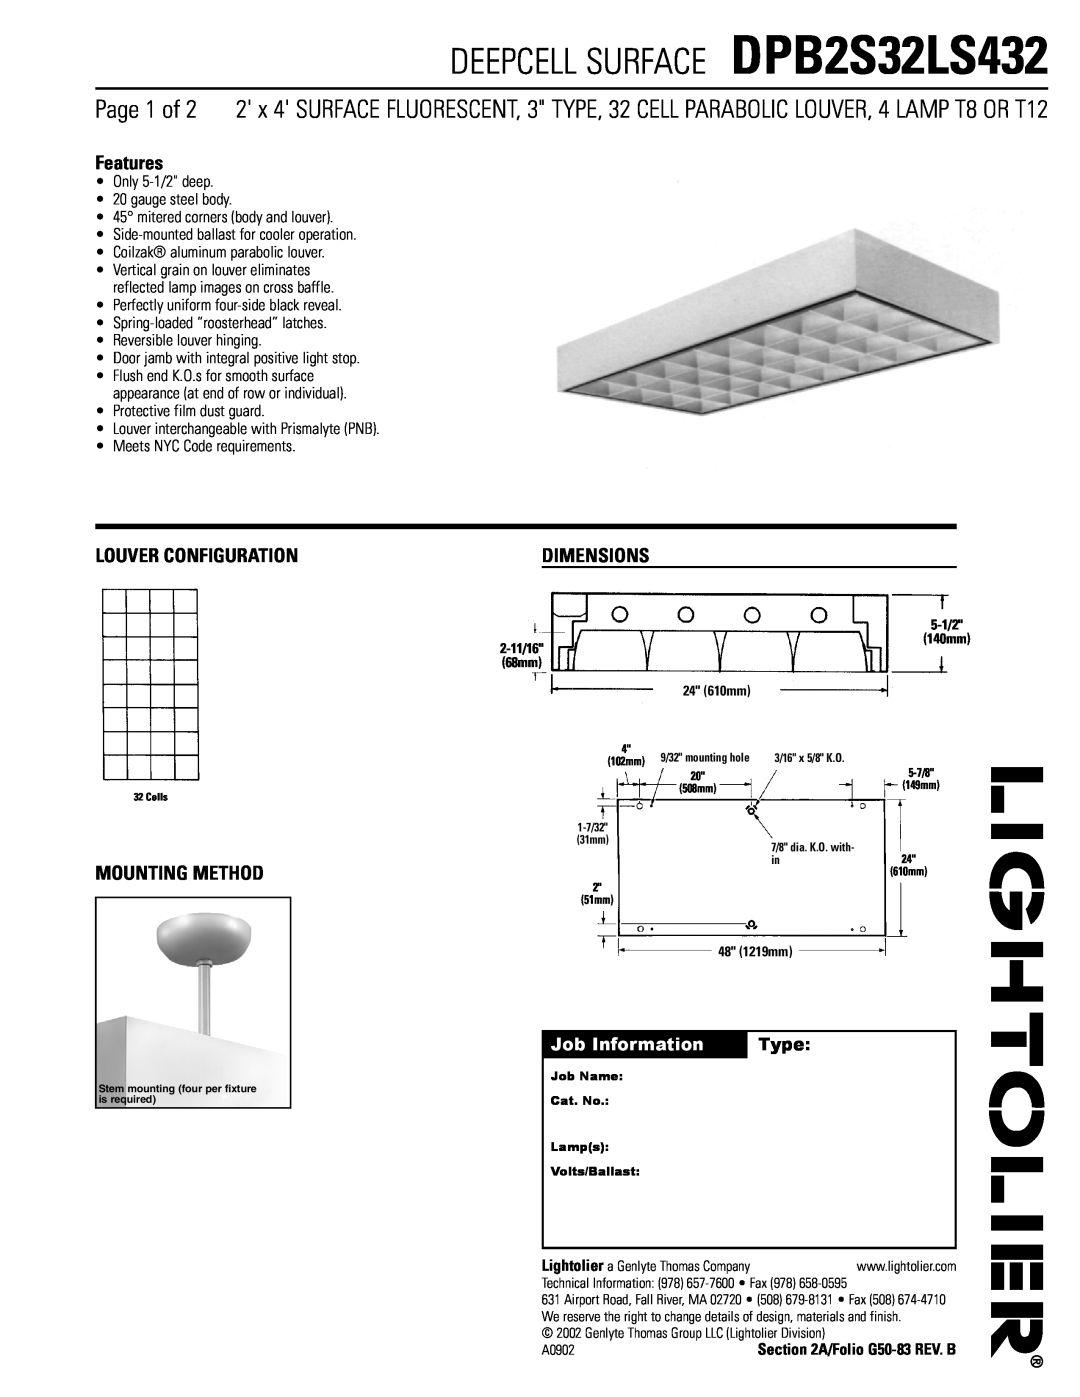 Lightolier dimensions DEEPCELL SURFACE DPB2S32LS432, Features, Louver Configuration, Dimensions, Mounting Method, Type 